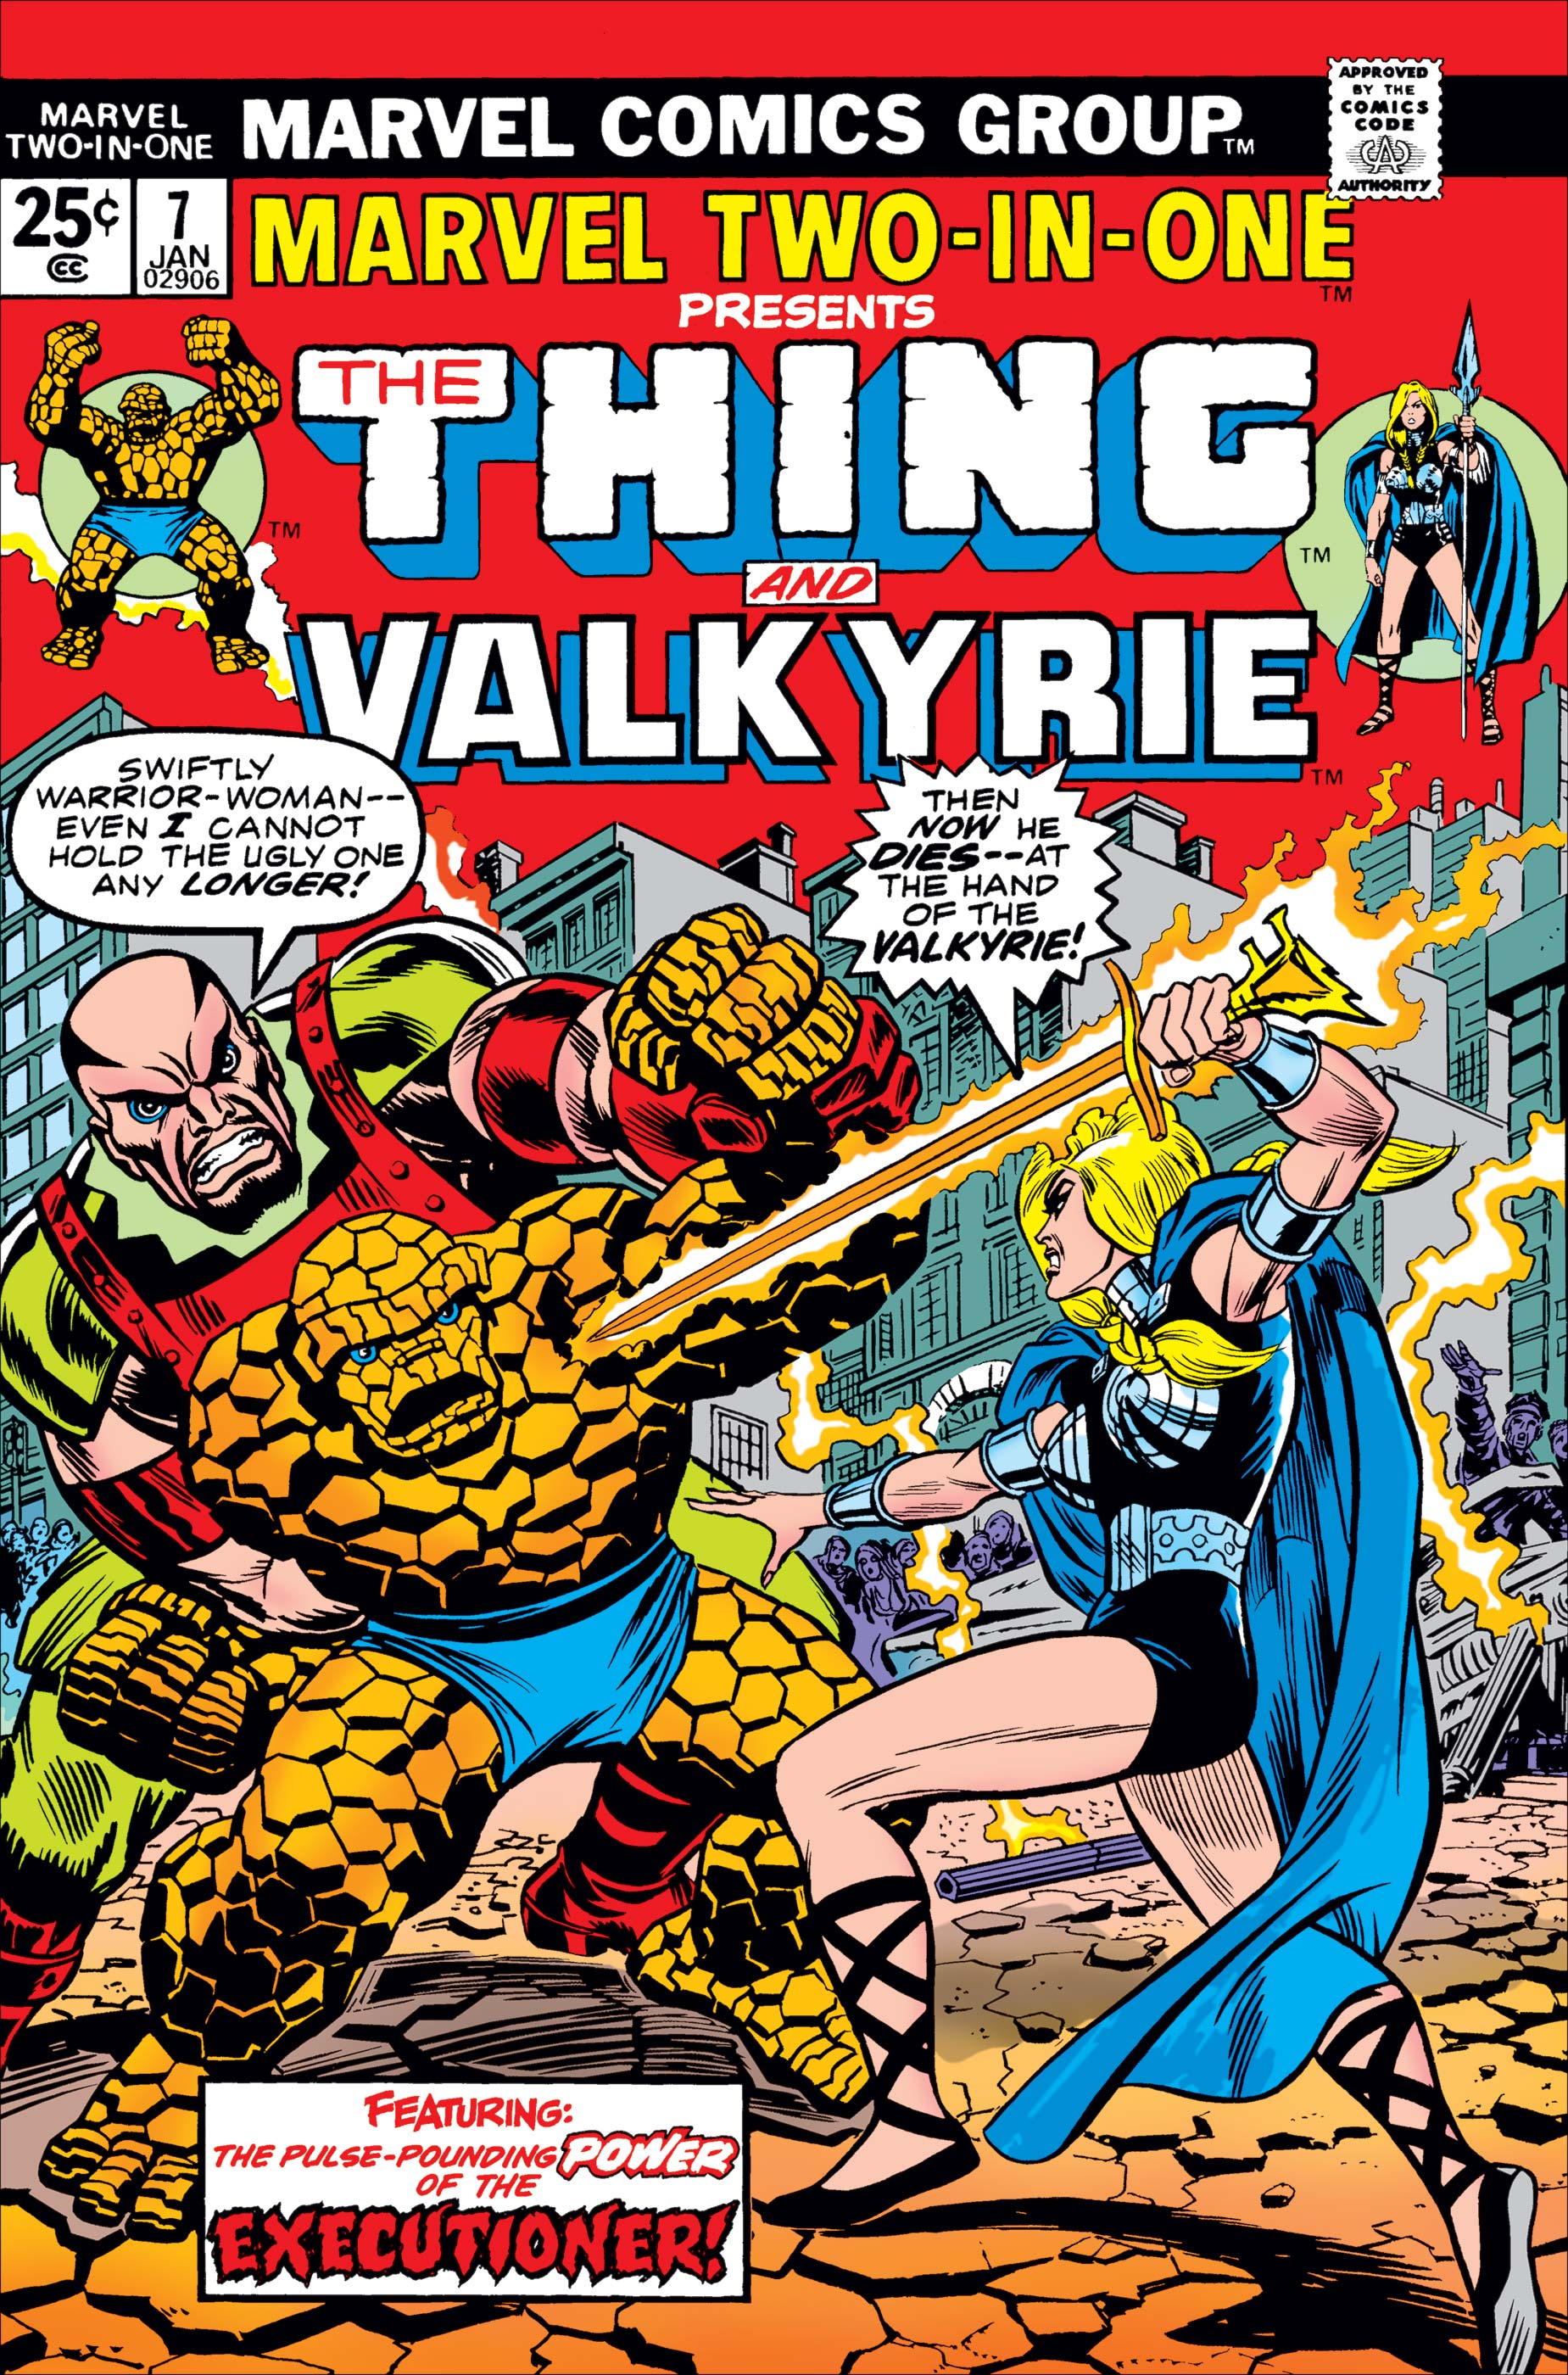 Marvel Two-in-One (1974) #7